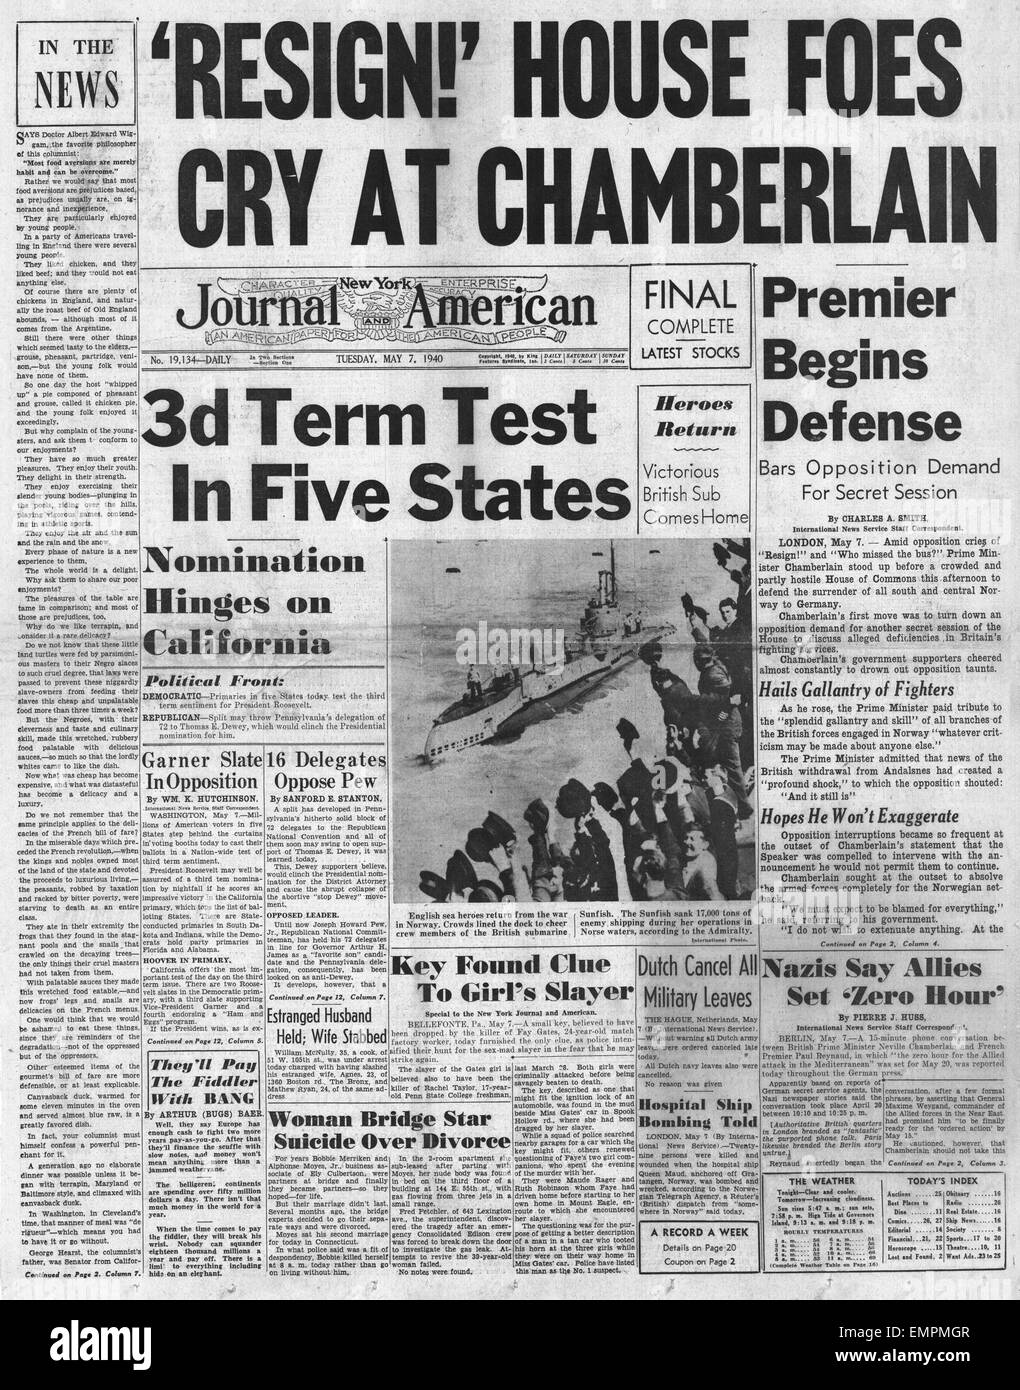 1940 front page  New York Journal American Call for Chamberlain to Resign Stock Photo